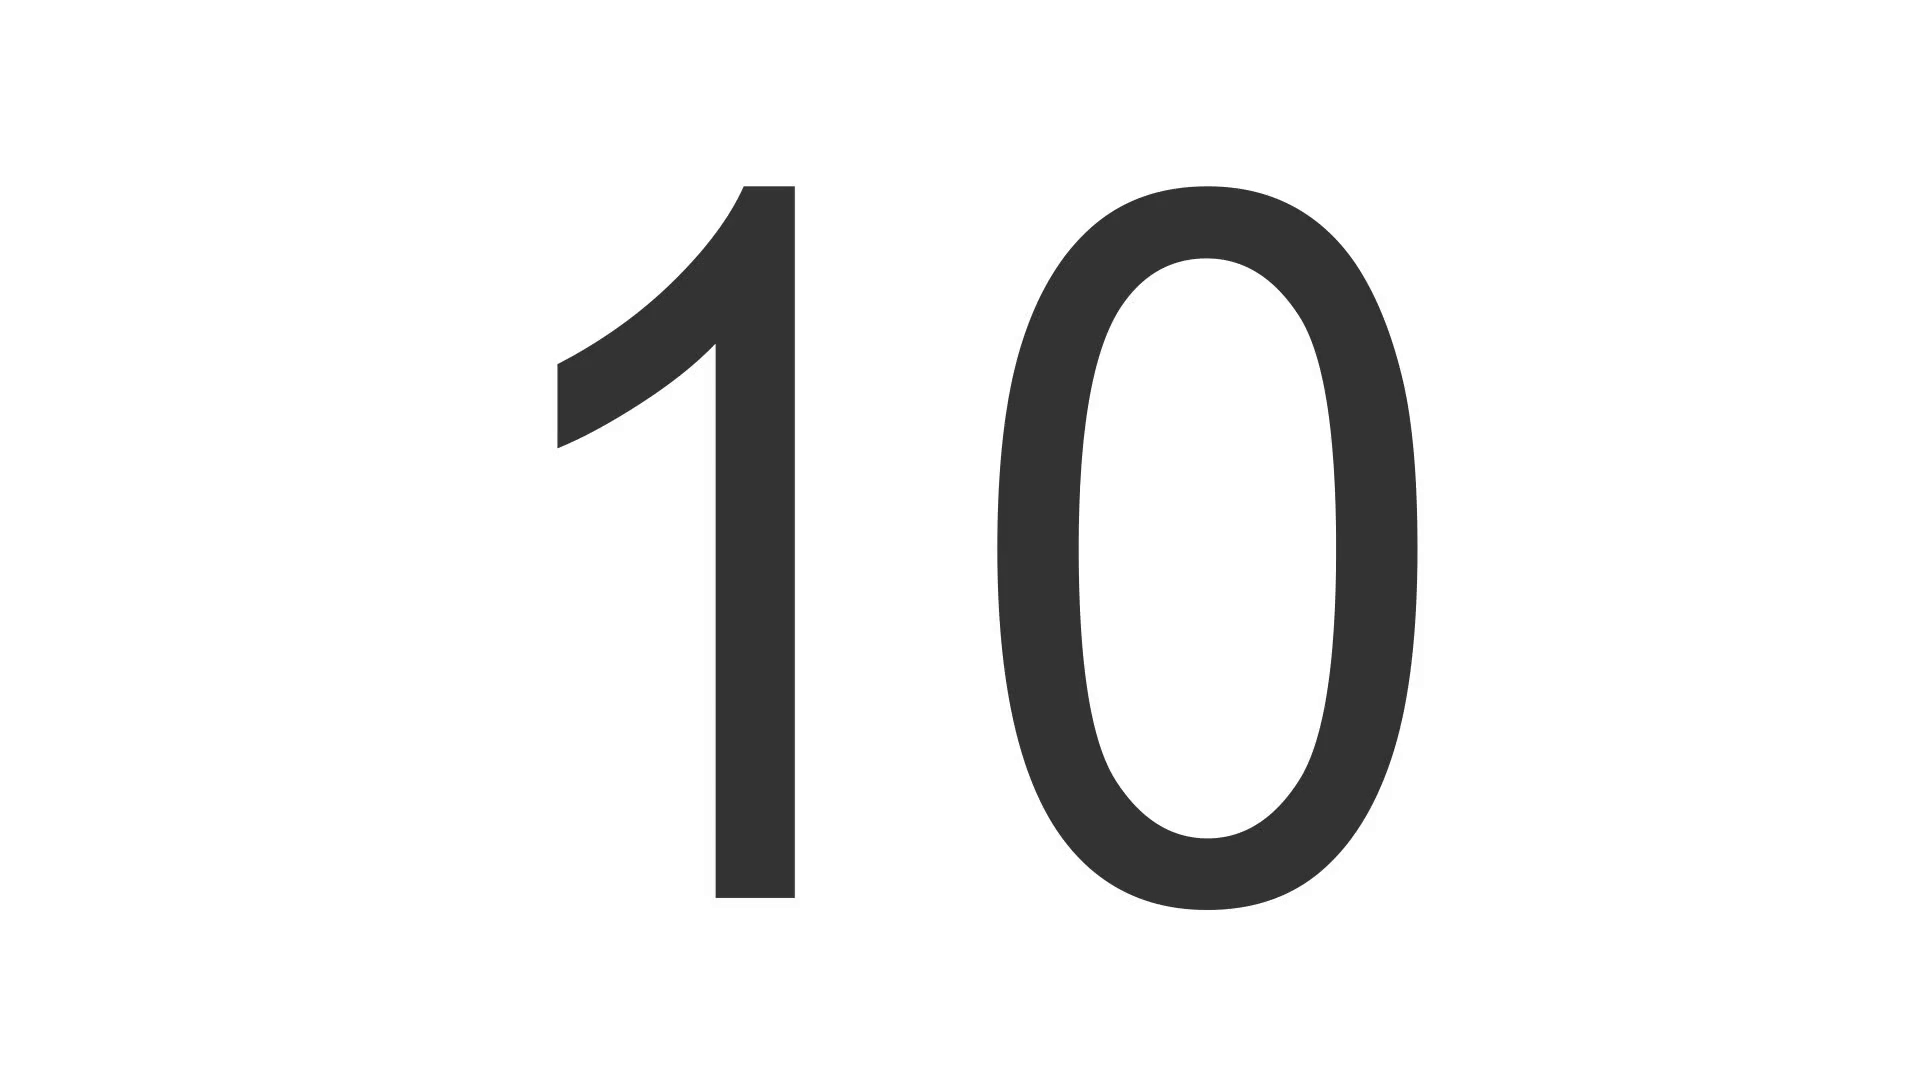 countdown 10 seconds dark numbers on white background